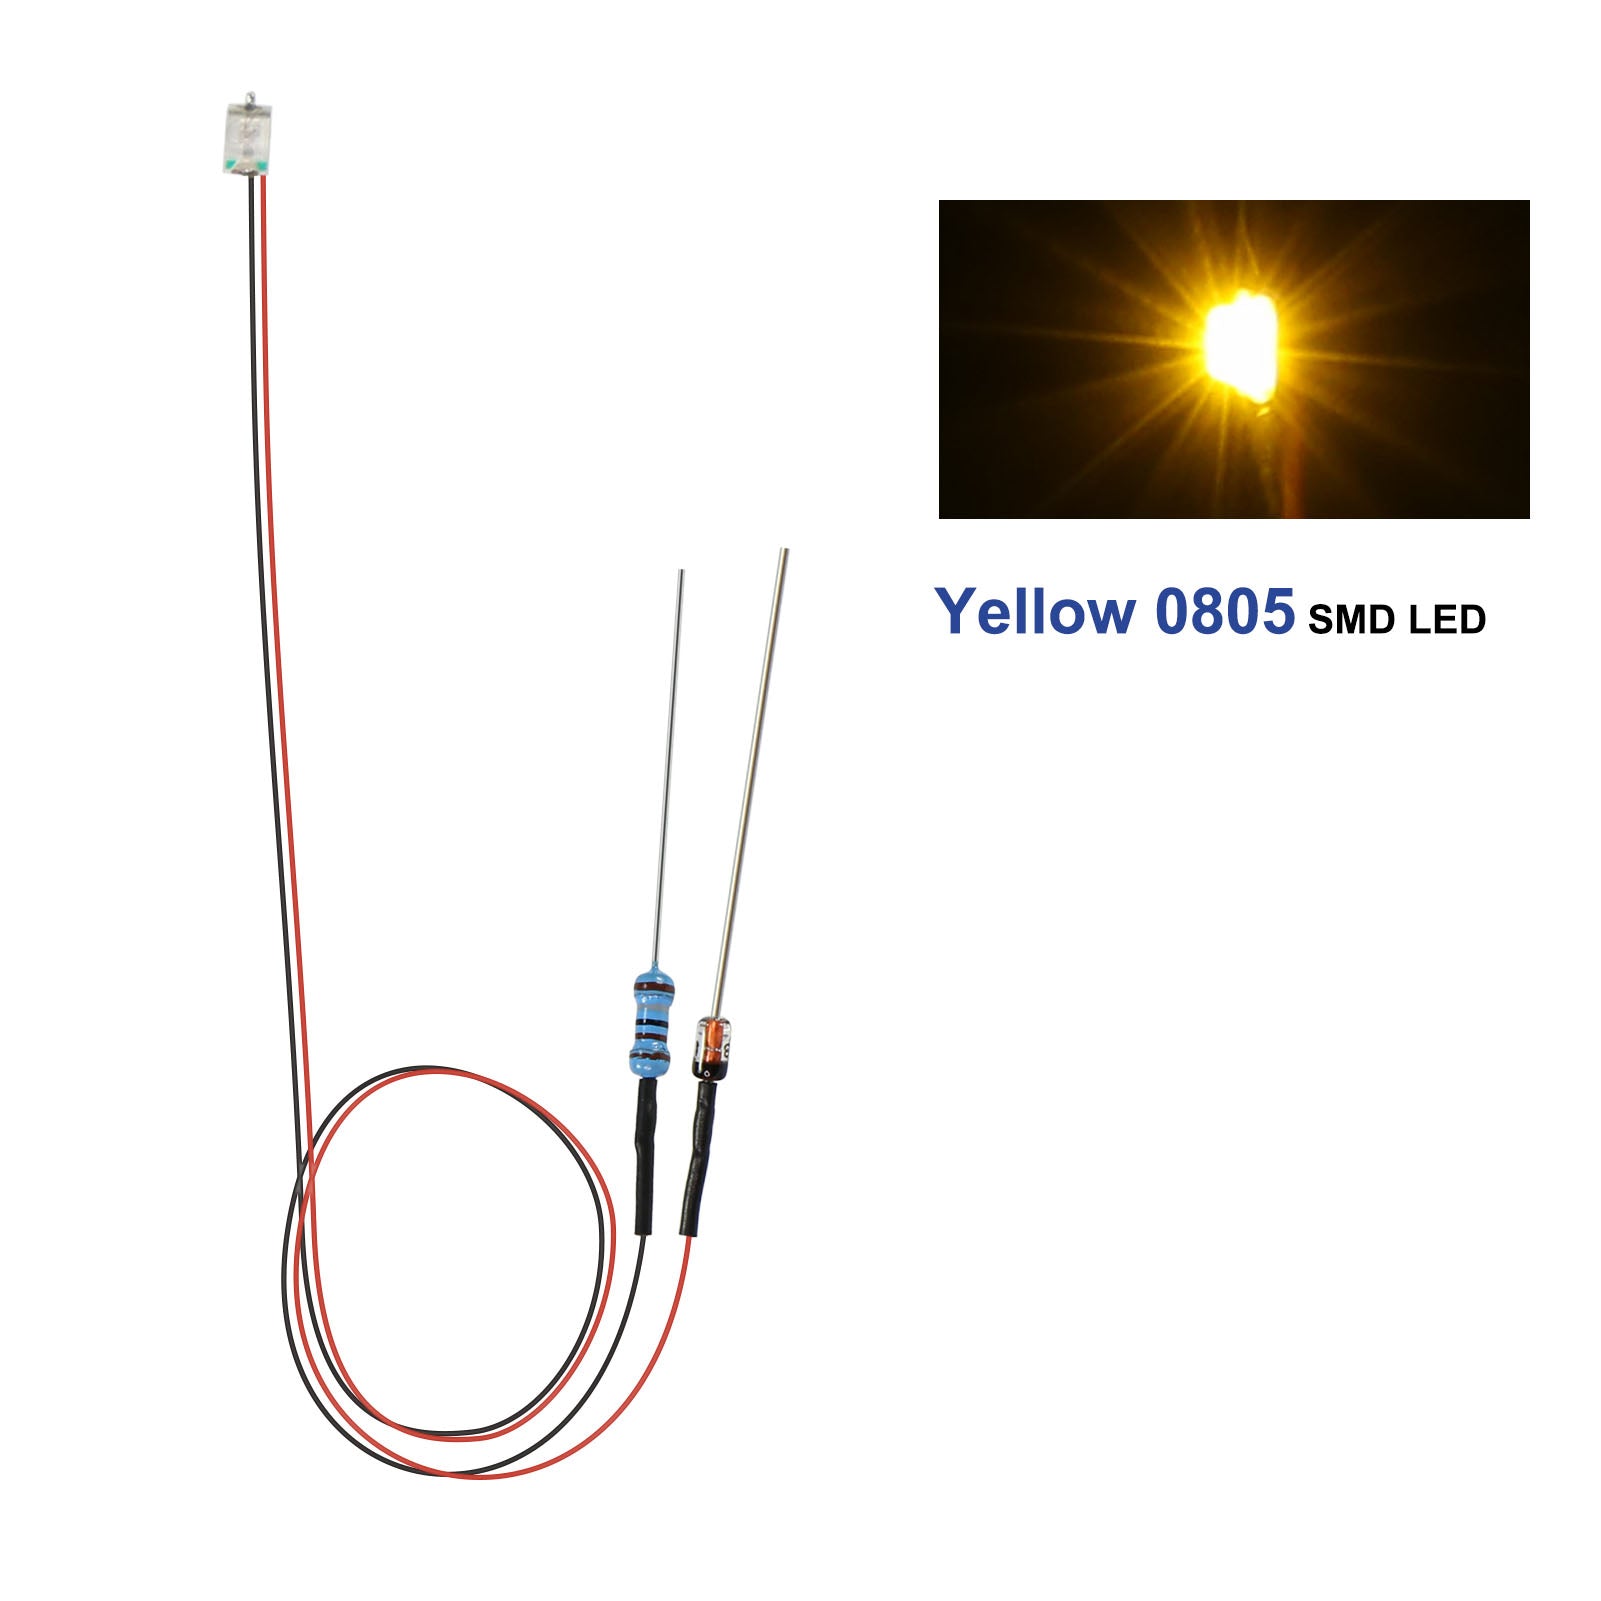 LR0805 20pcs Pre-wired 50cm Wire 0805 SMD LED Lights with Resistor Rectifier